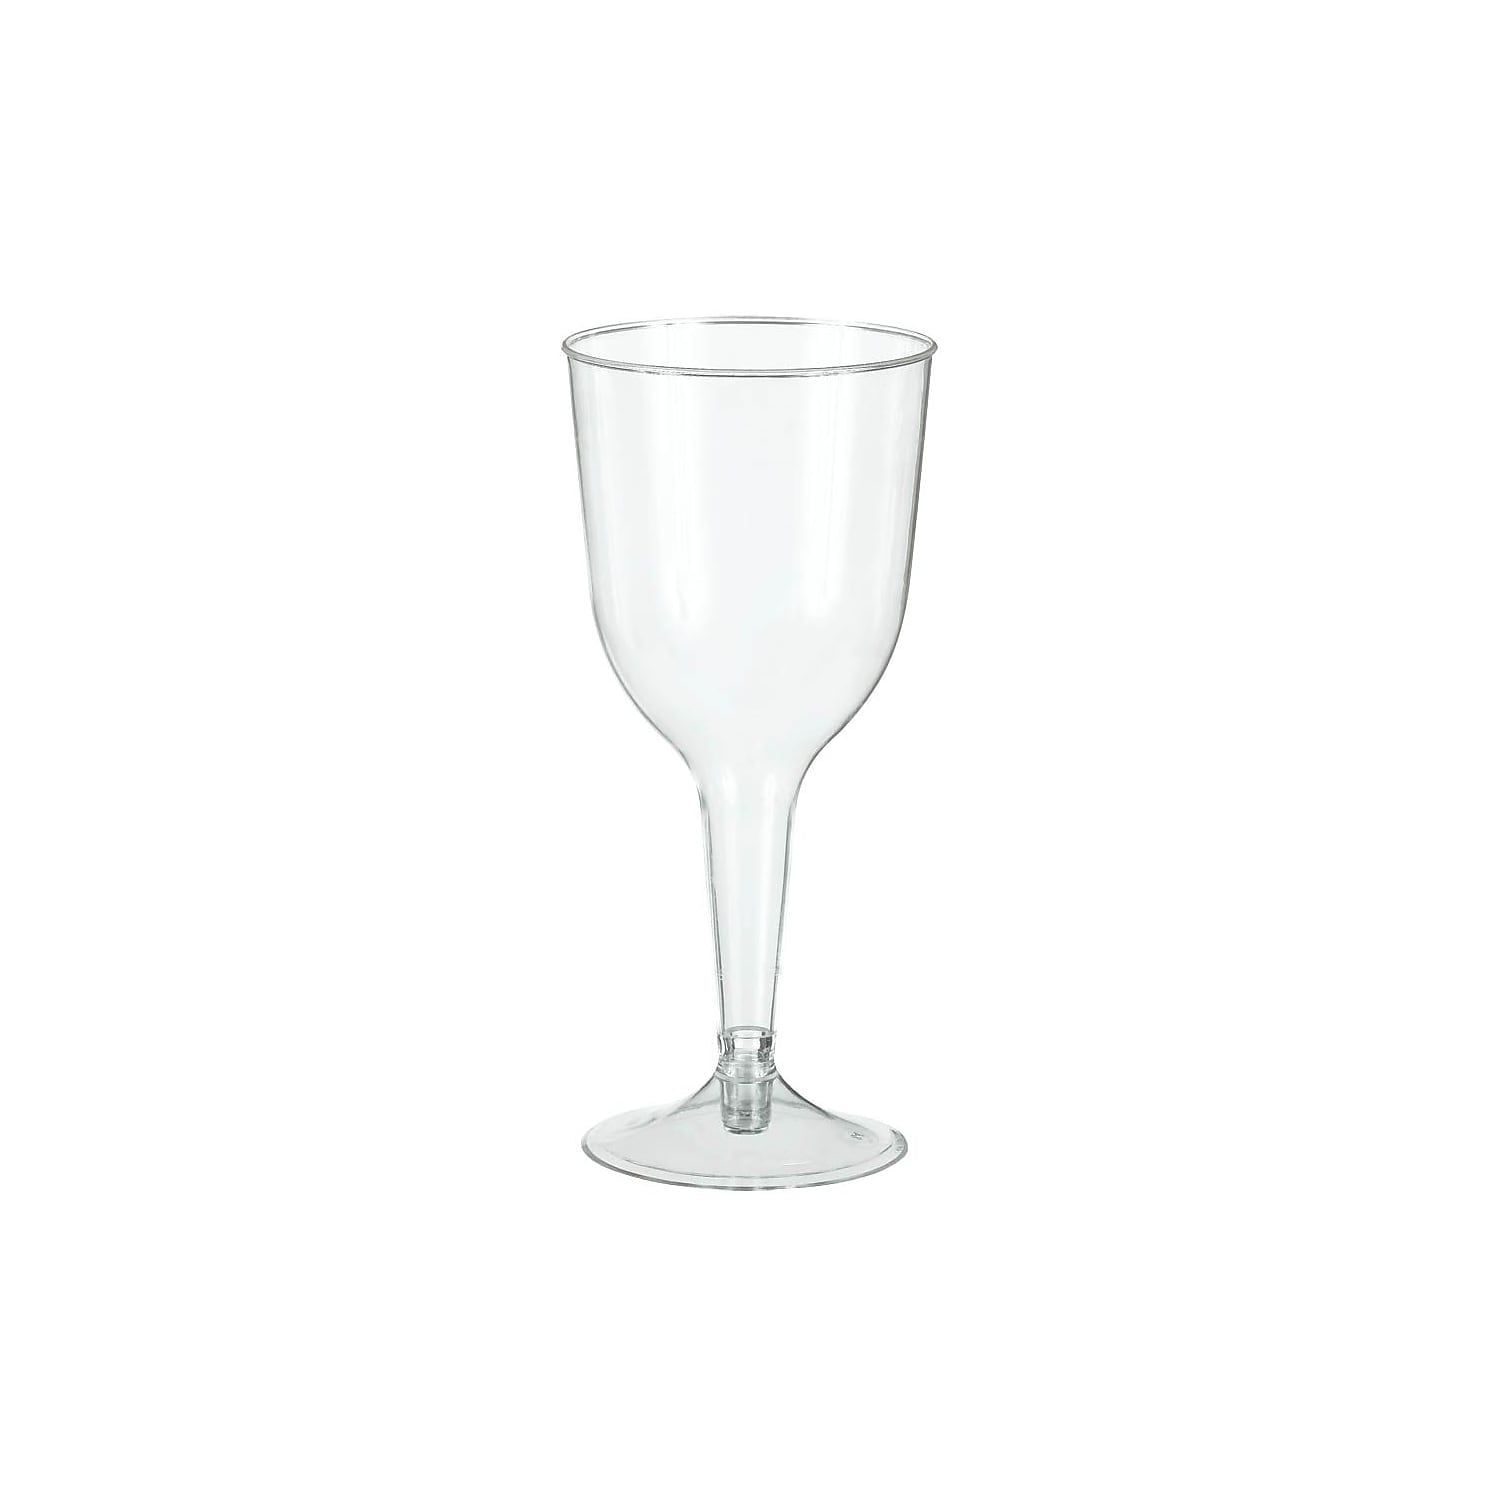 SALE Hammered Collection Plastic Wine Cups Silver 10 oz 10 Count